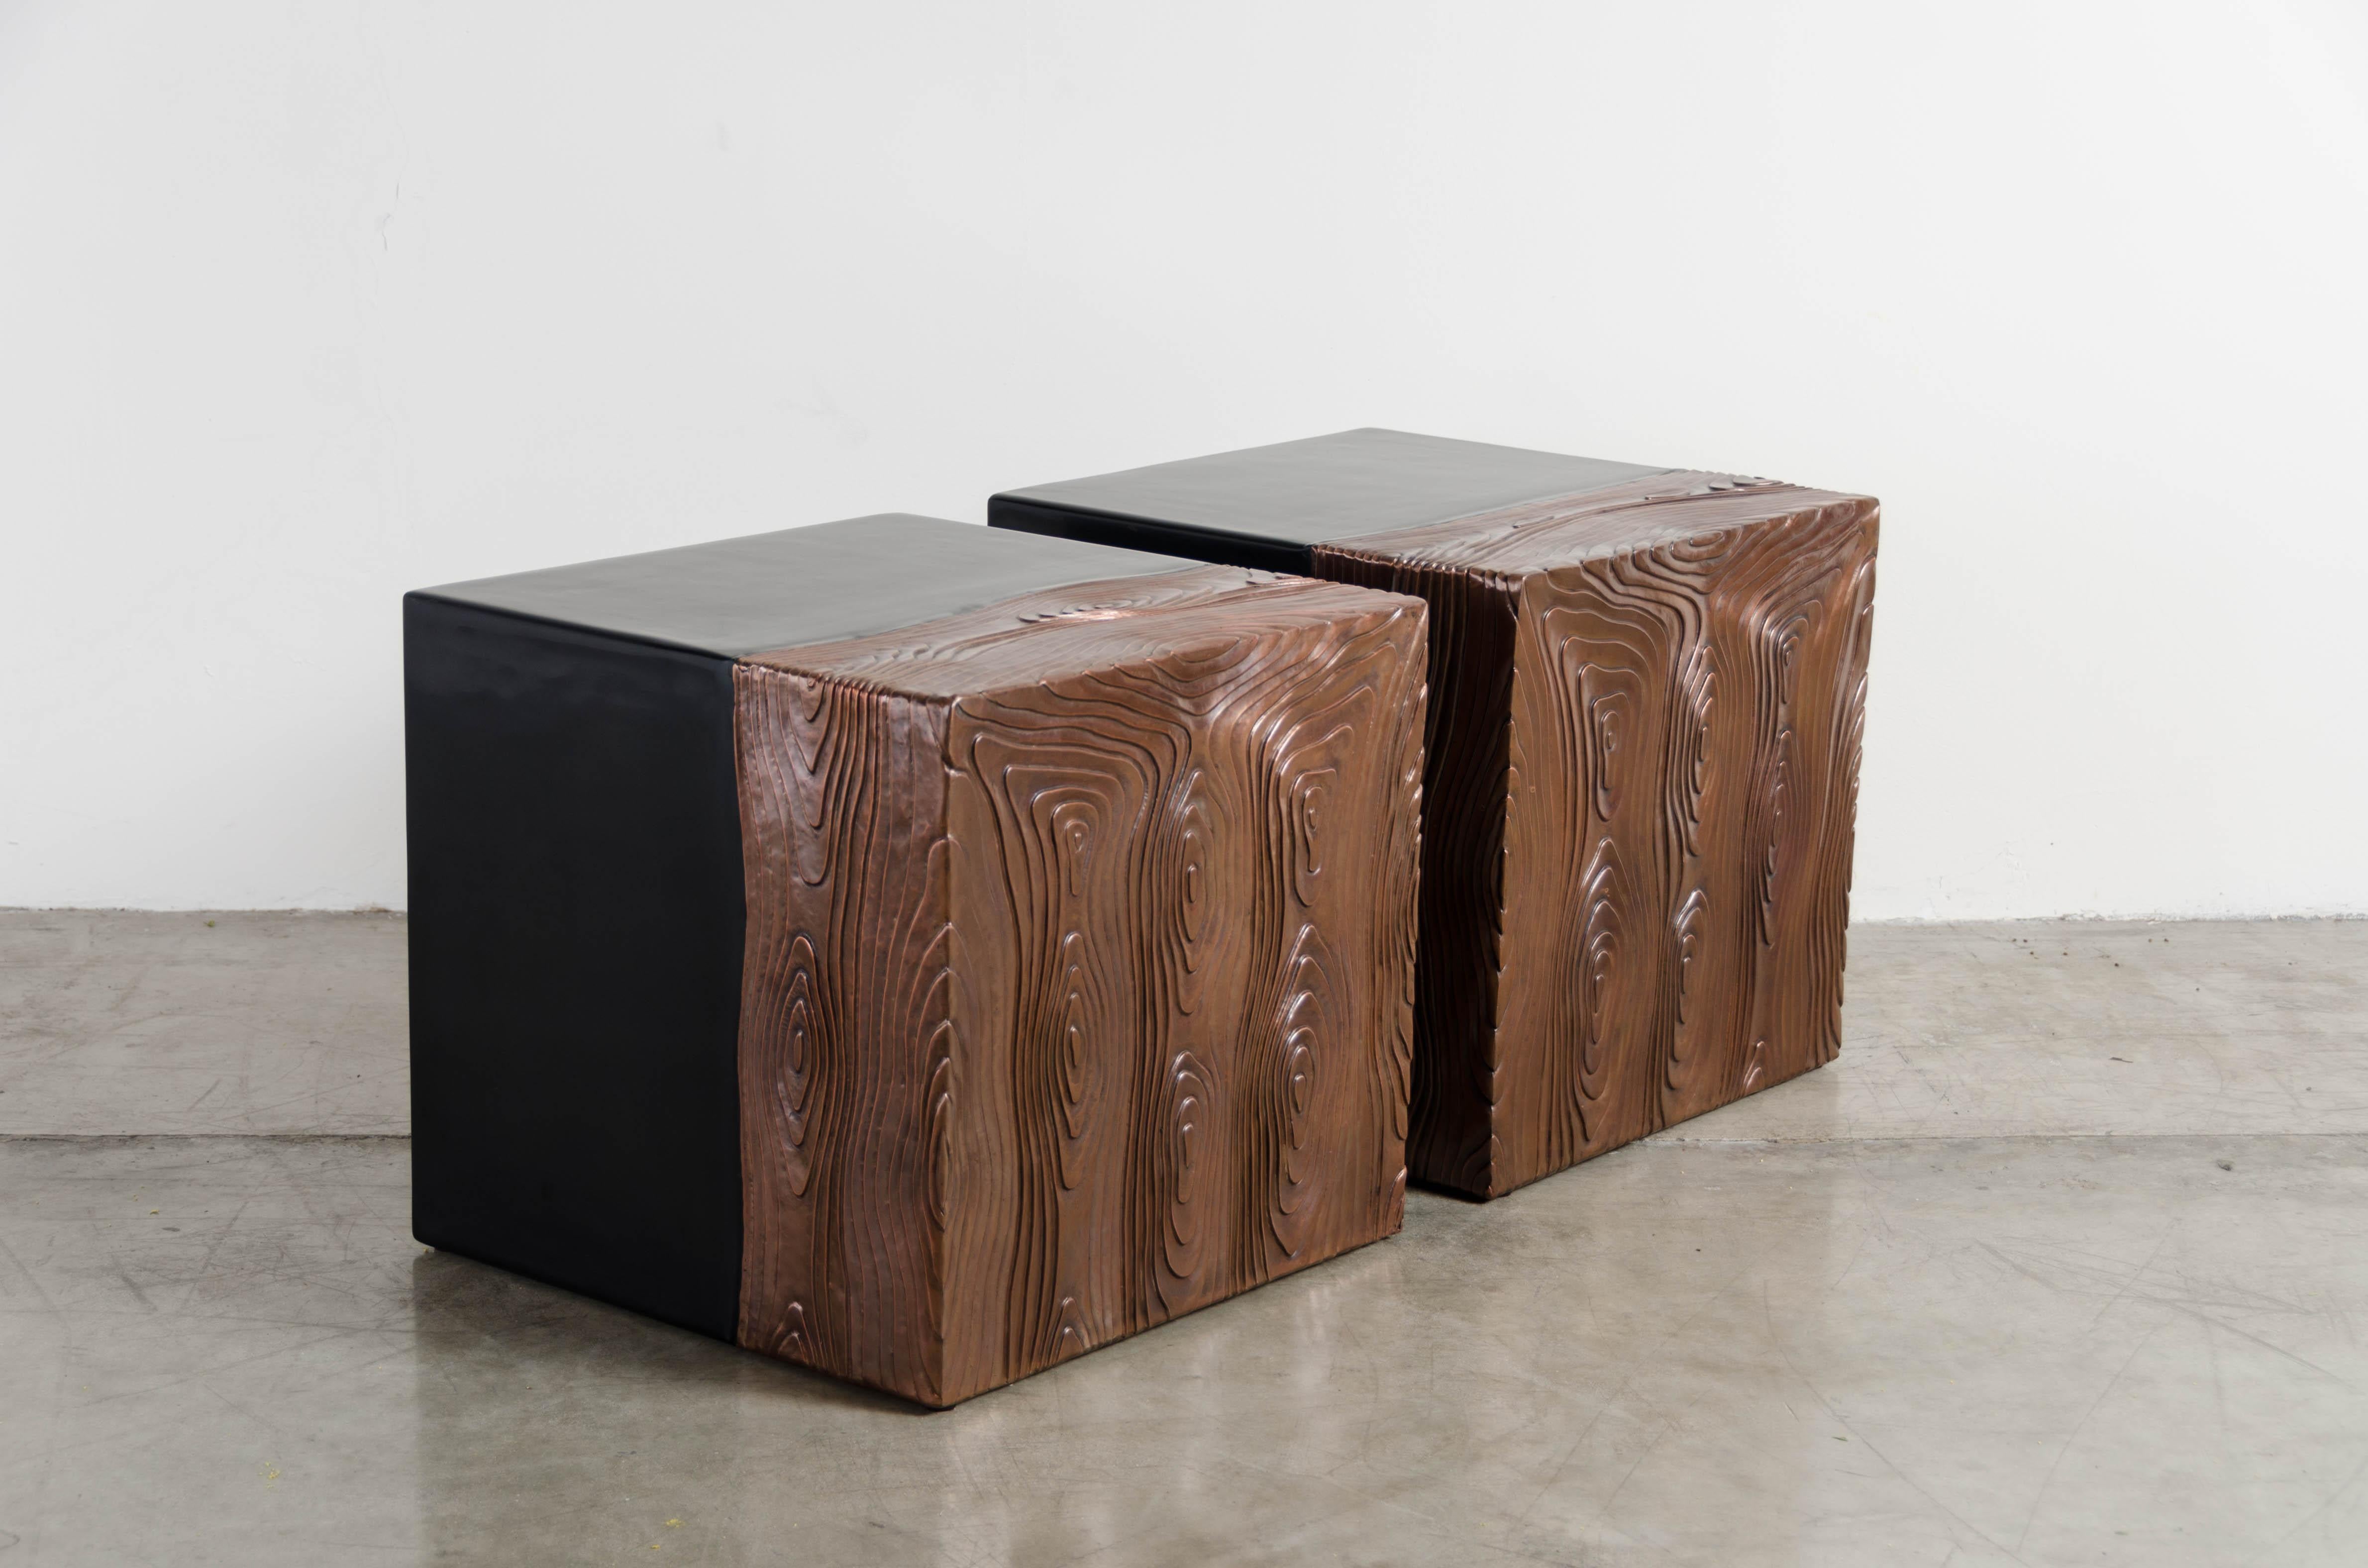 Repoussé Square Seat with Woodgrain Design, Black Lacquer, Copper, Set of 2 by Robert Kuo For Sale